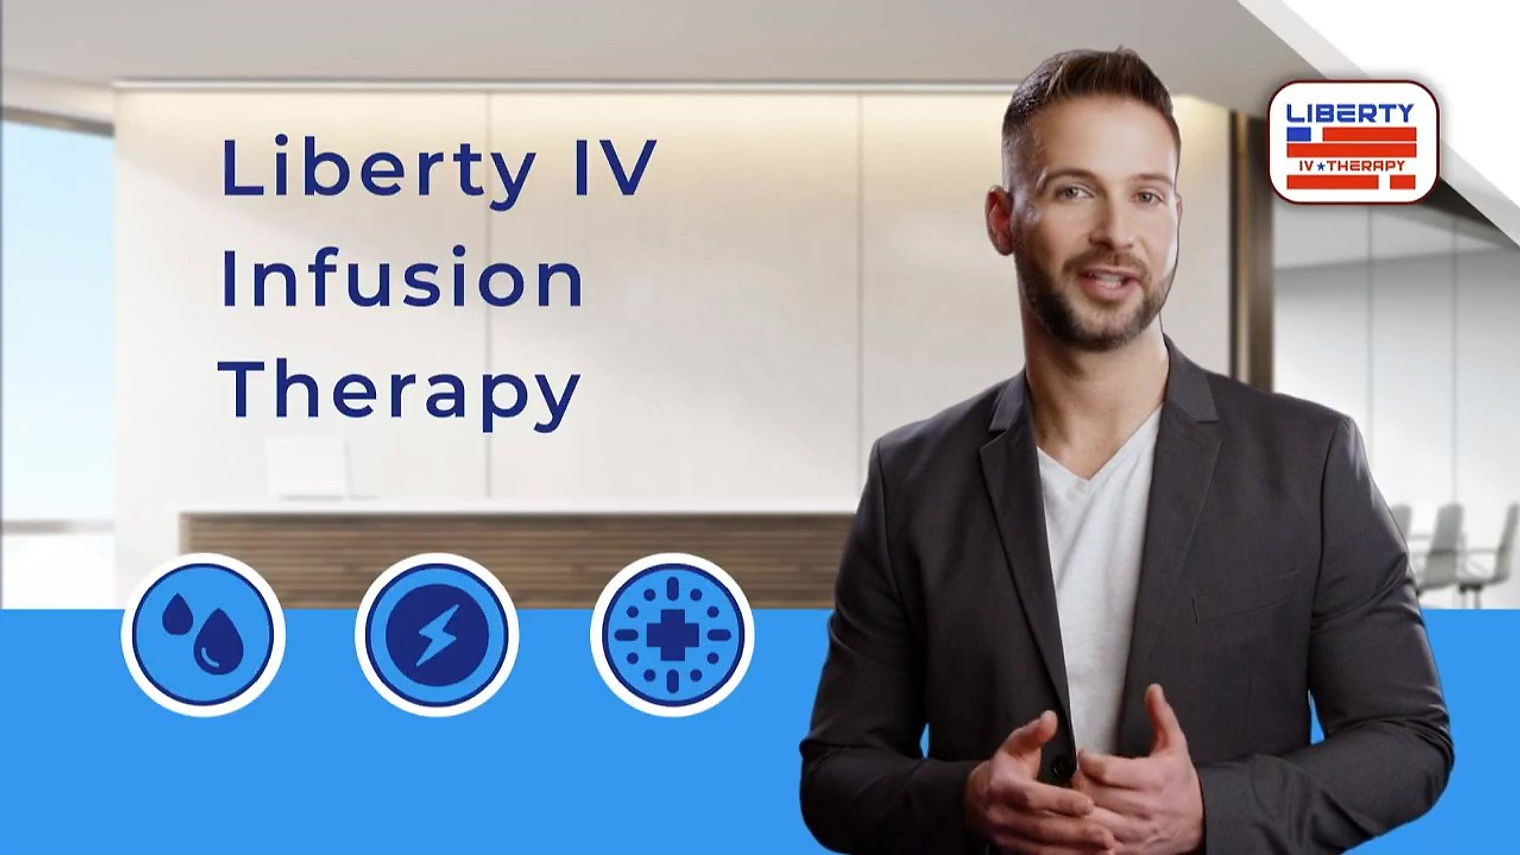 Liberty IV Infusion Therapy